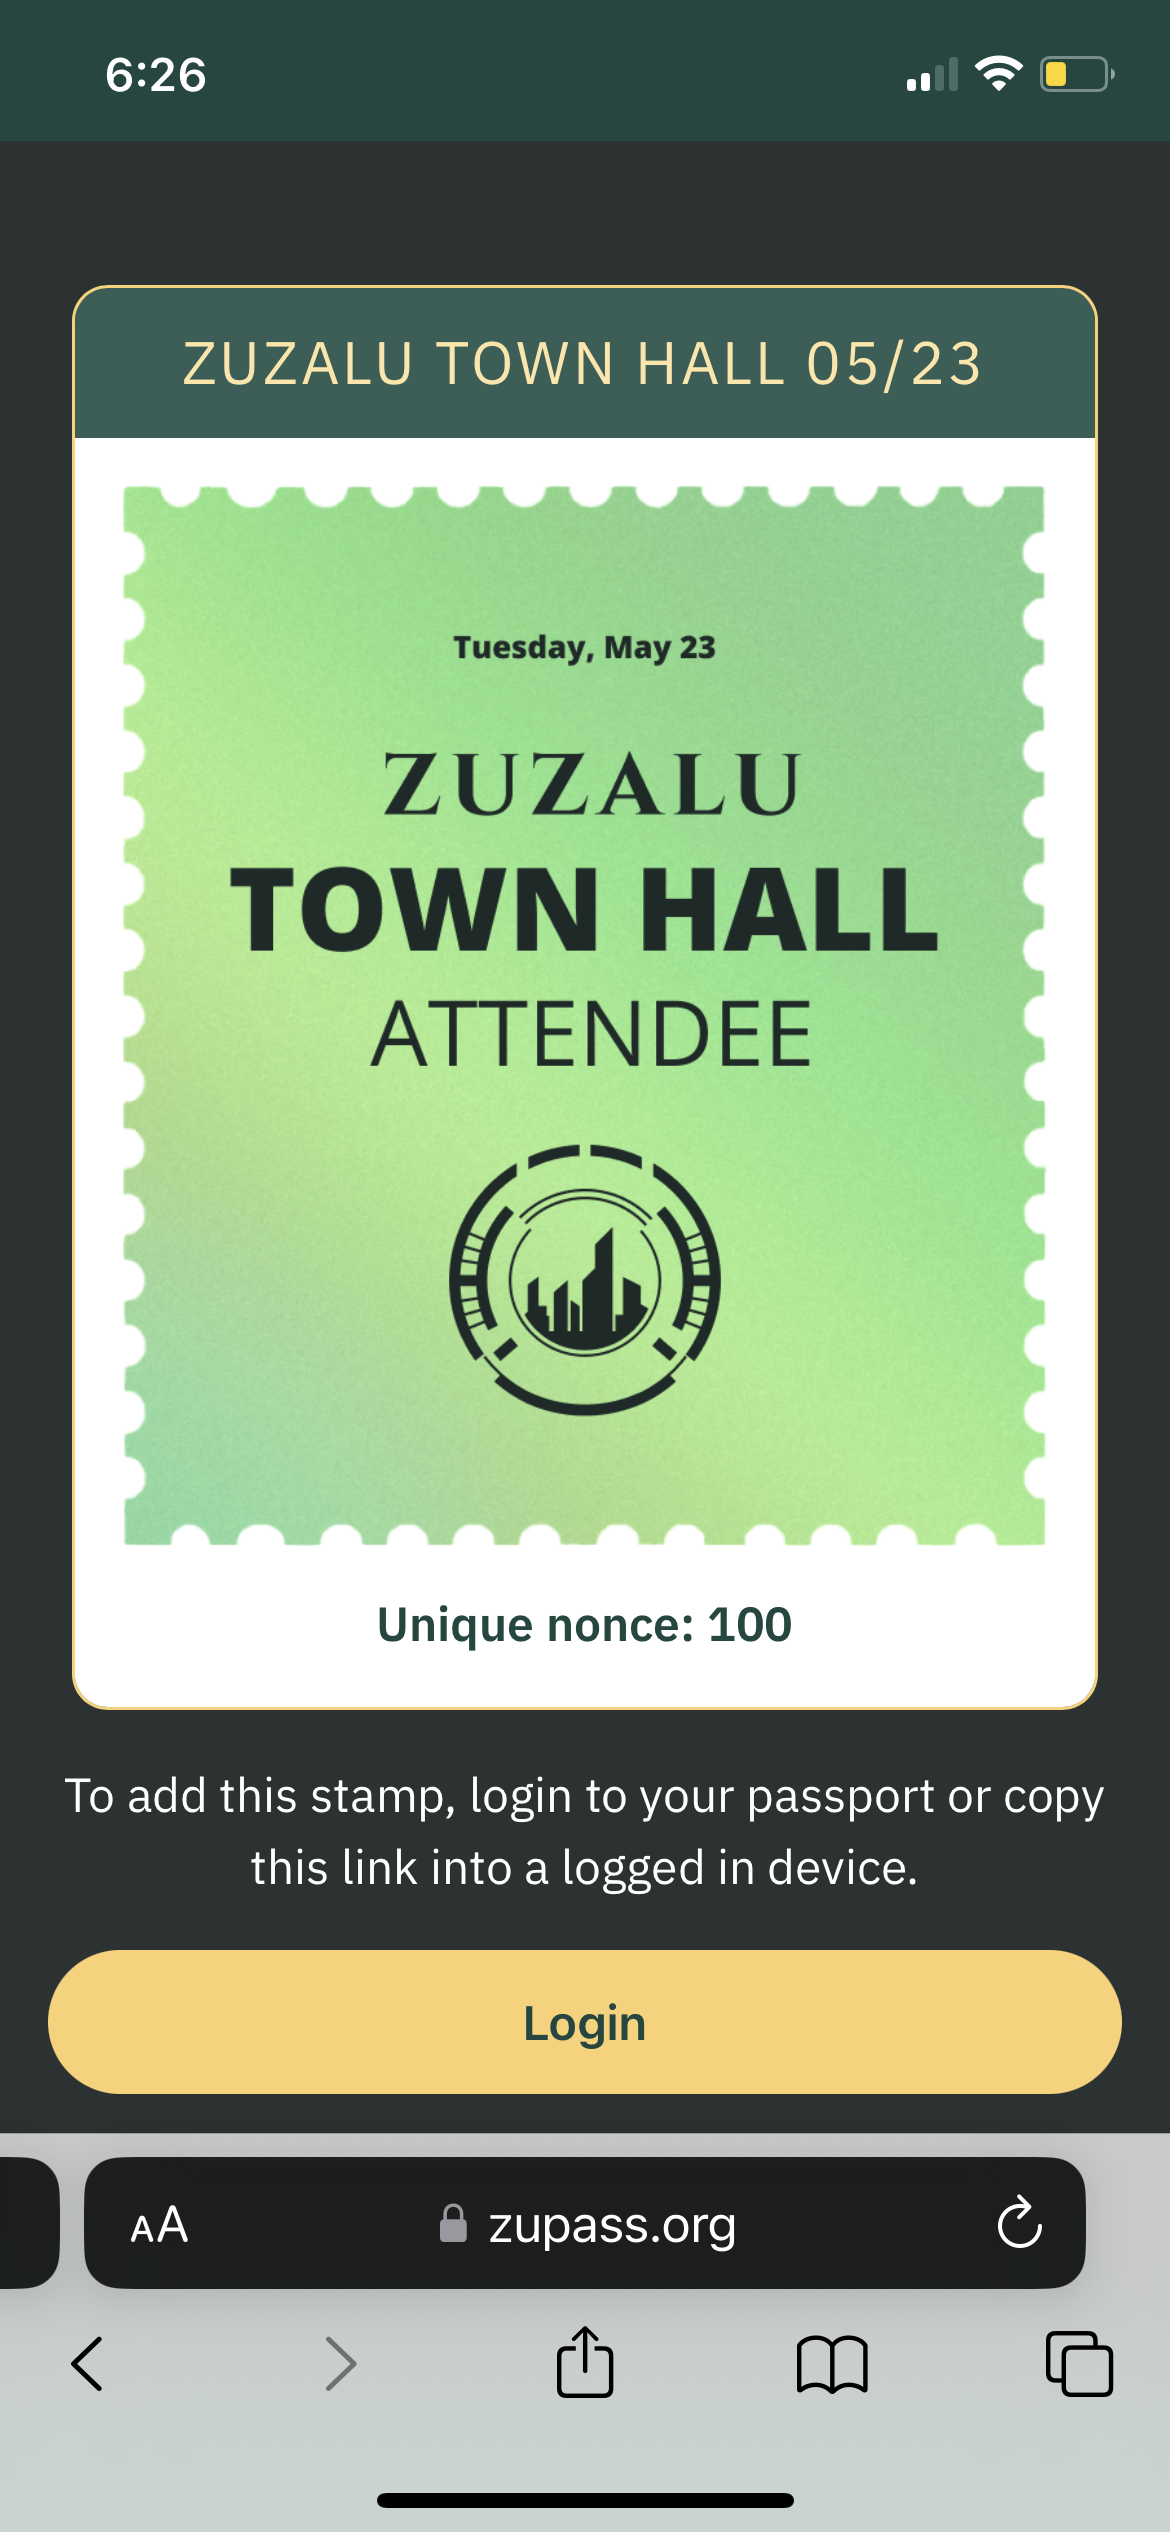 The incrementing nonce is displayed as part of the stamp a user receives.